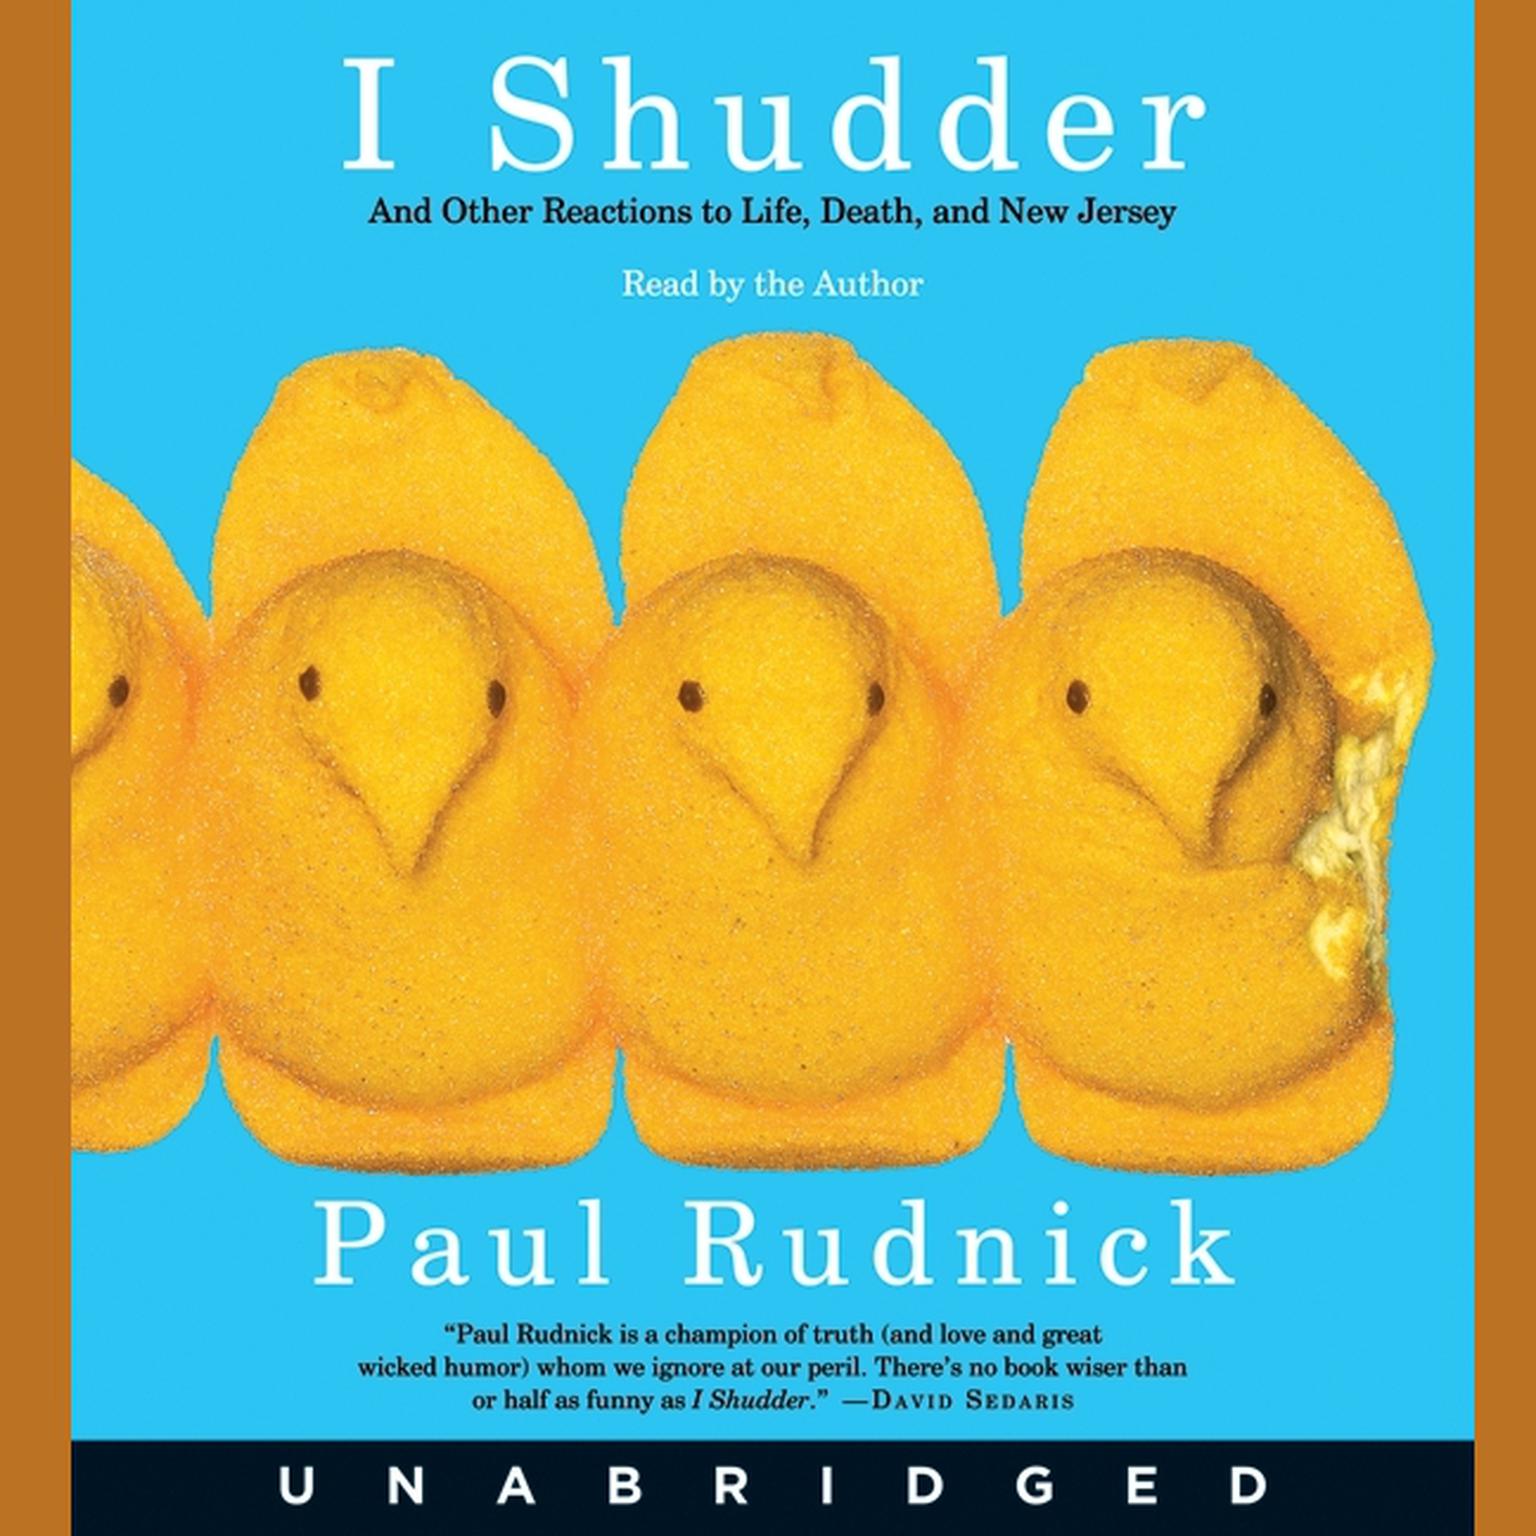 I Shudder: And Other Reactions to Life, Death, and New Jersey Audiobook, by Paul Rudnick